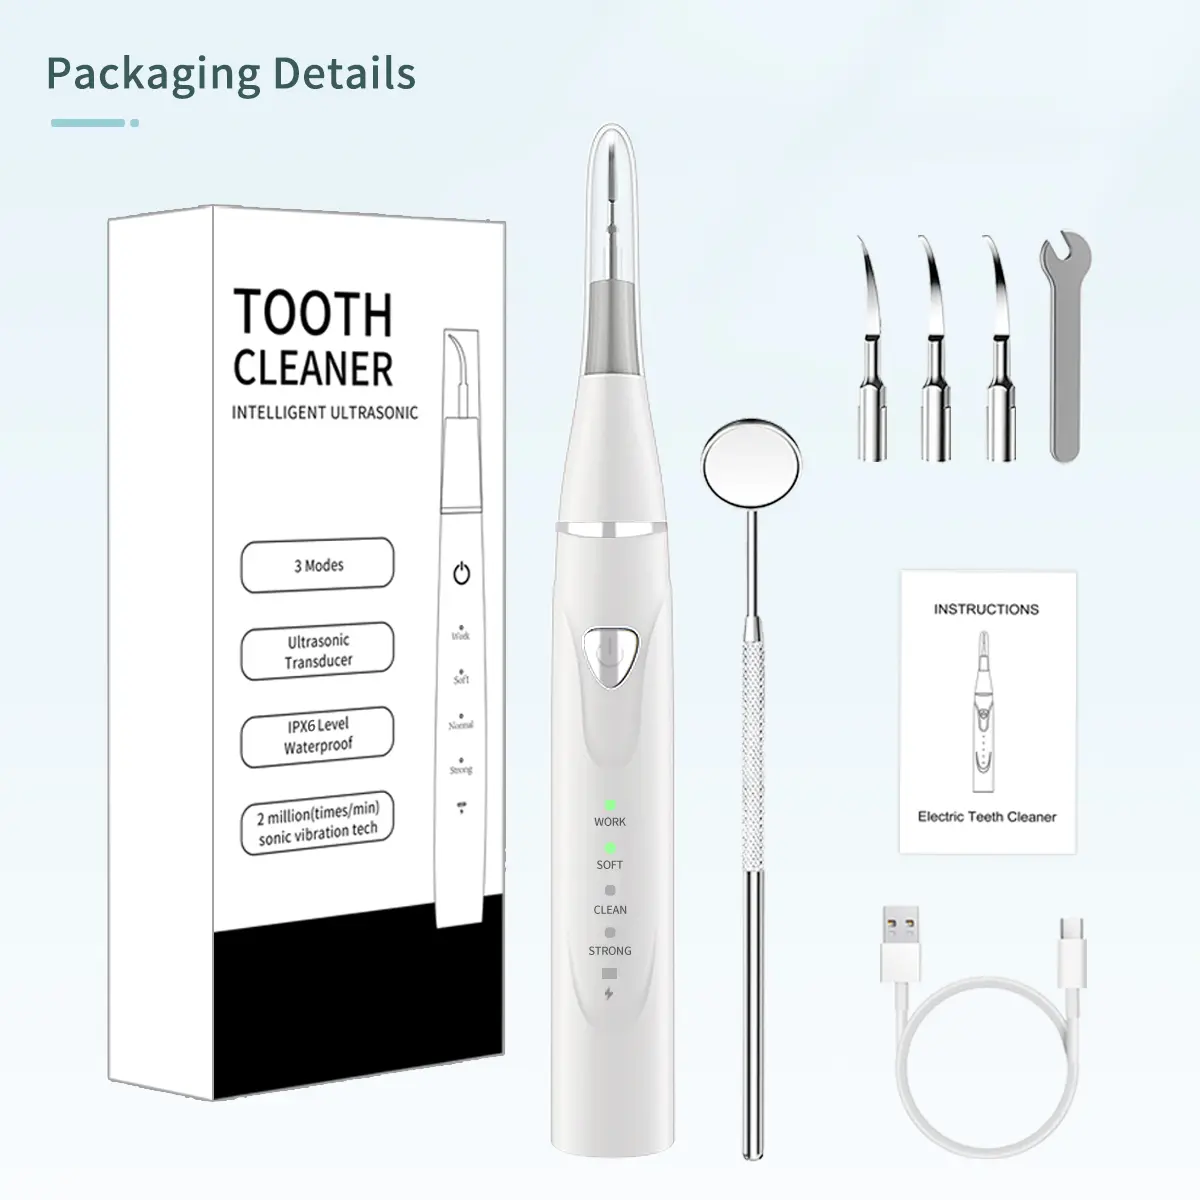 OEM Portable Dental Scaler oral hygiene care appliances oem teeth tooth cleaner whitening cleaning kit products at home